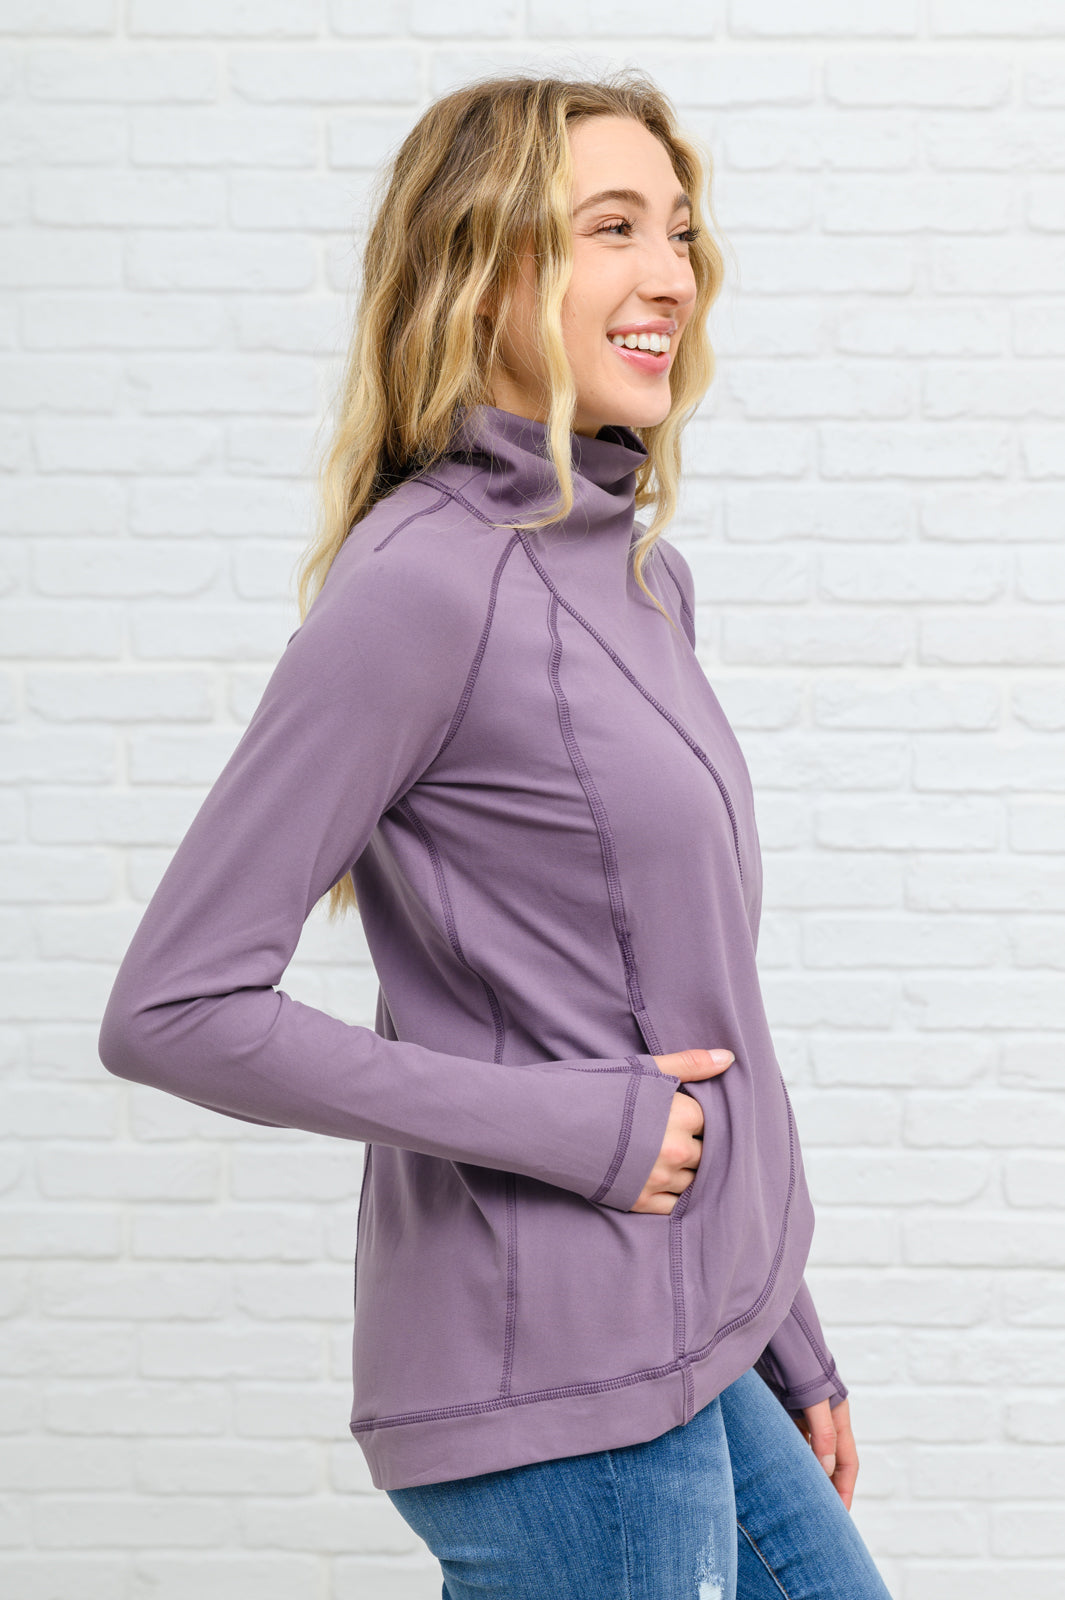 Sport a Look Asymmetric Cowl Neck Jacket In Mulberry   